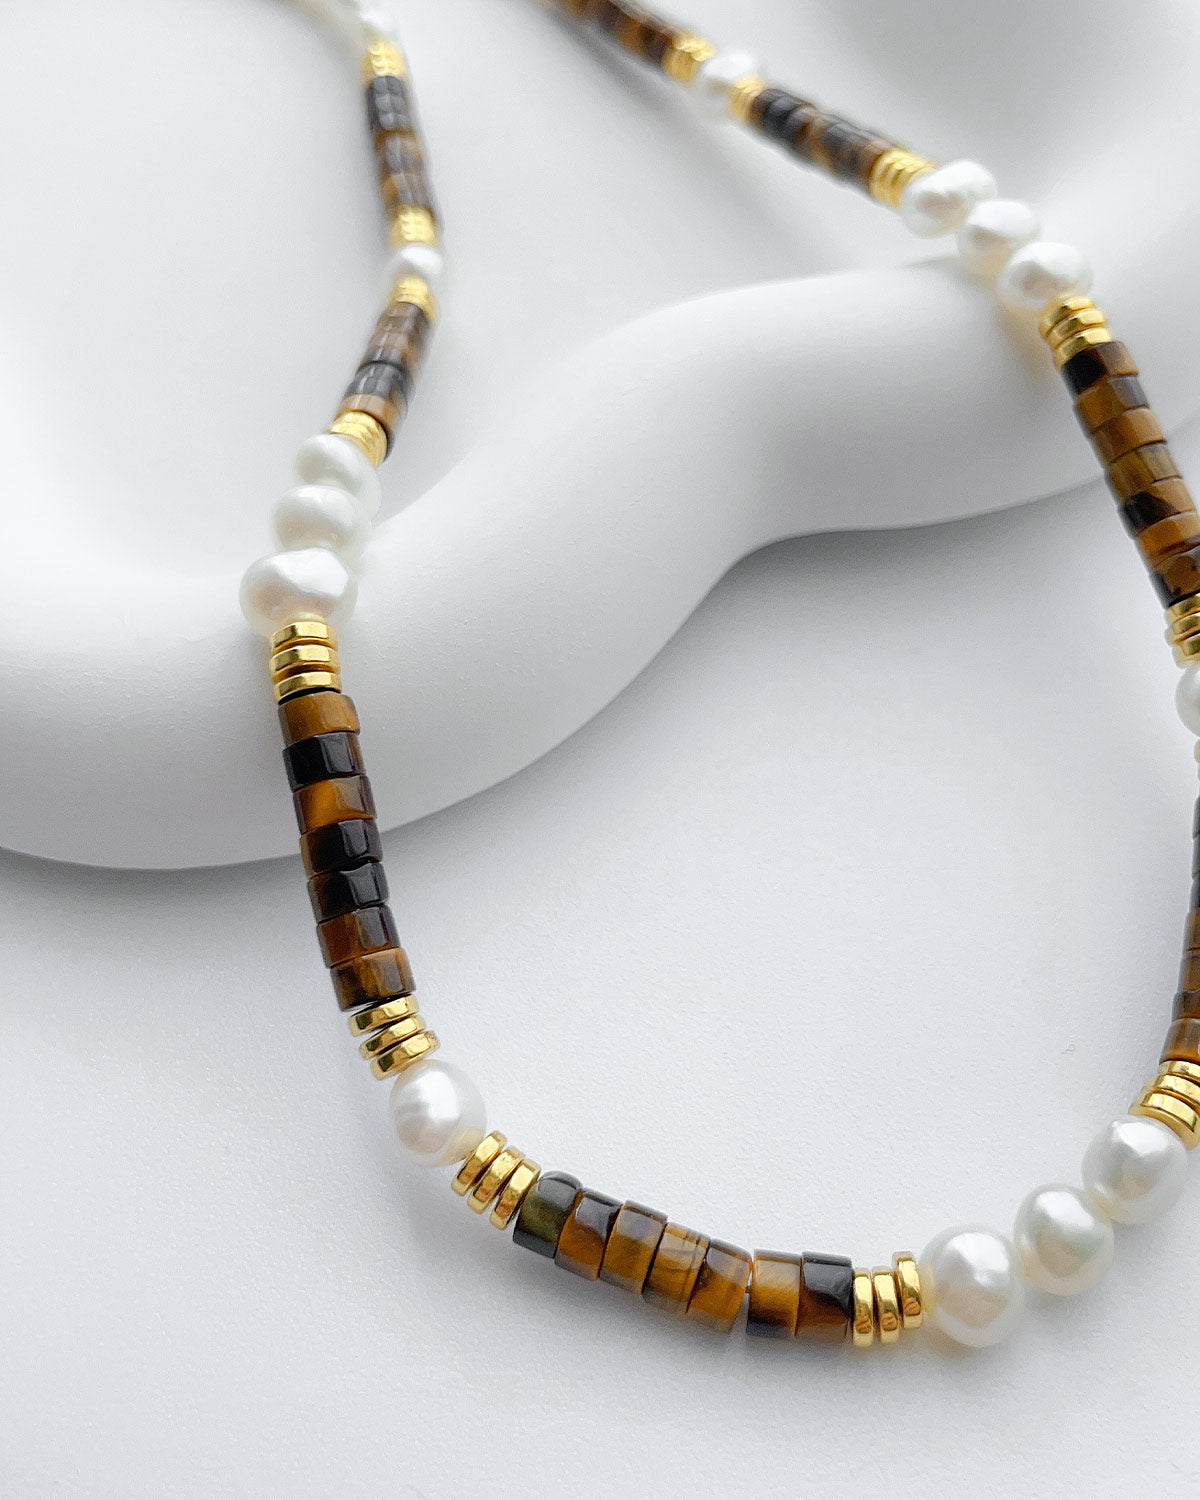 Vitality Tiger's Eye & Baroque Pearl Necklace